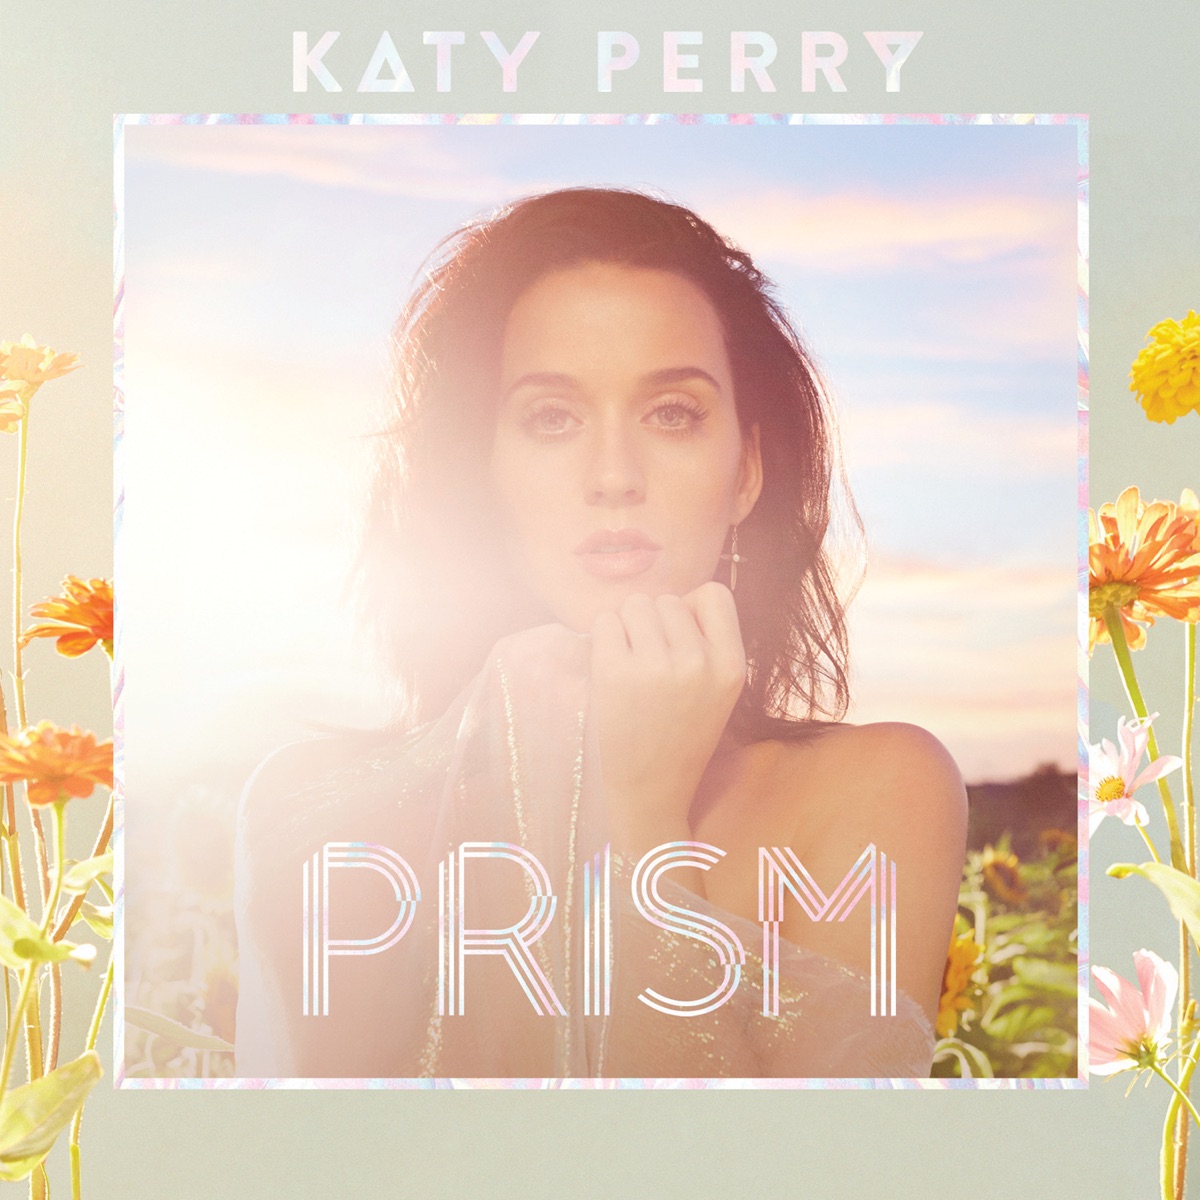 Katy Perry - PRISM (Deluxe Version)